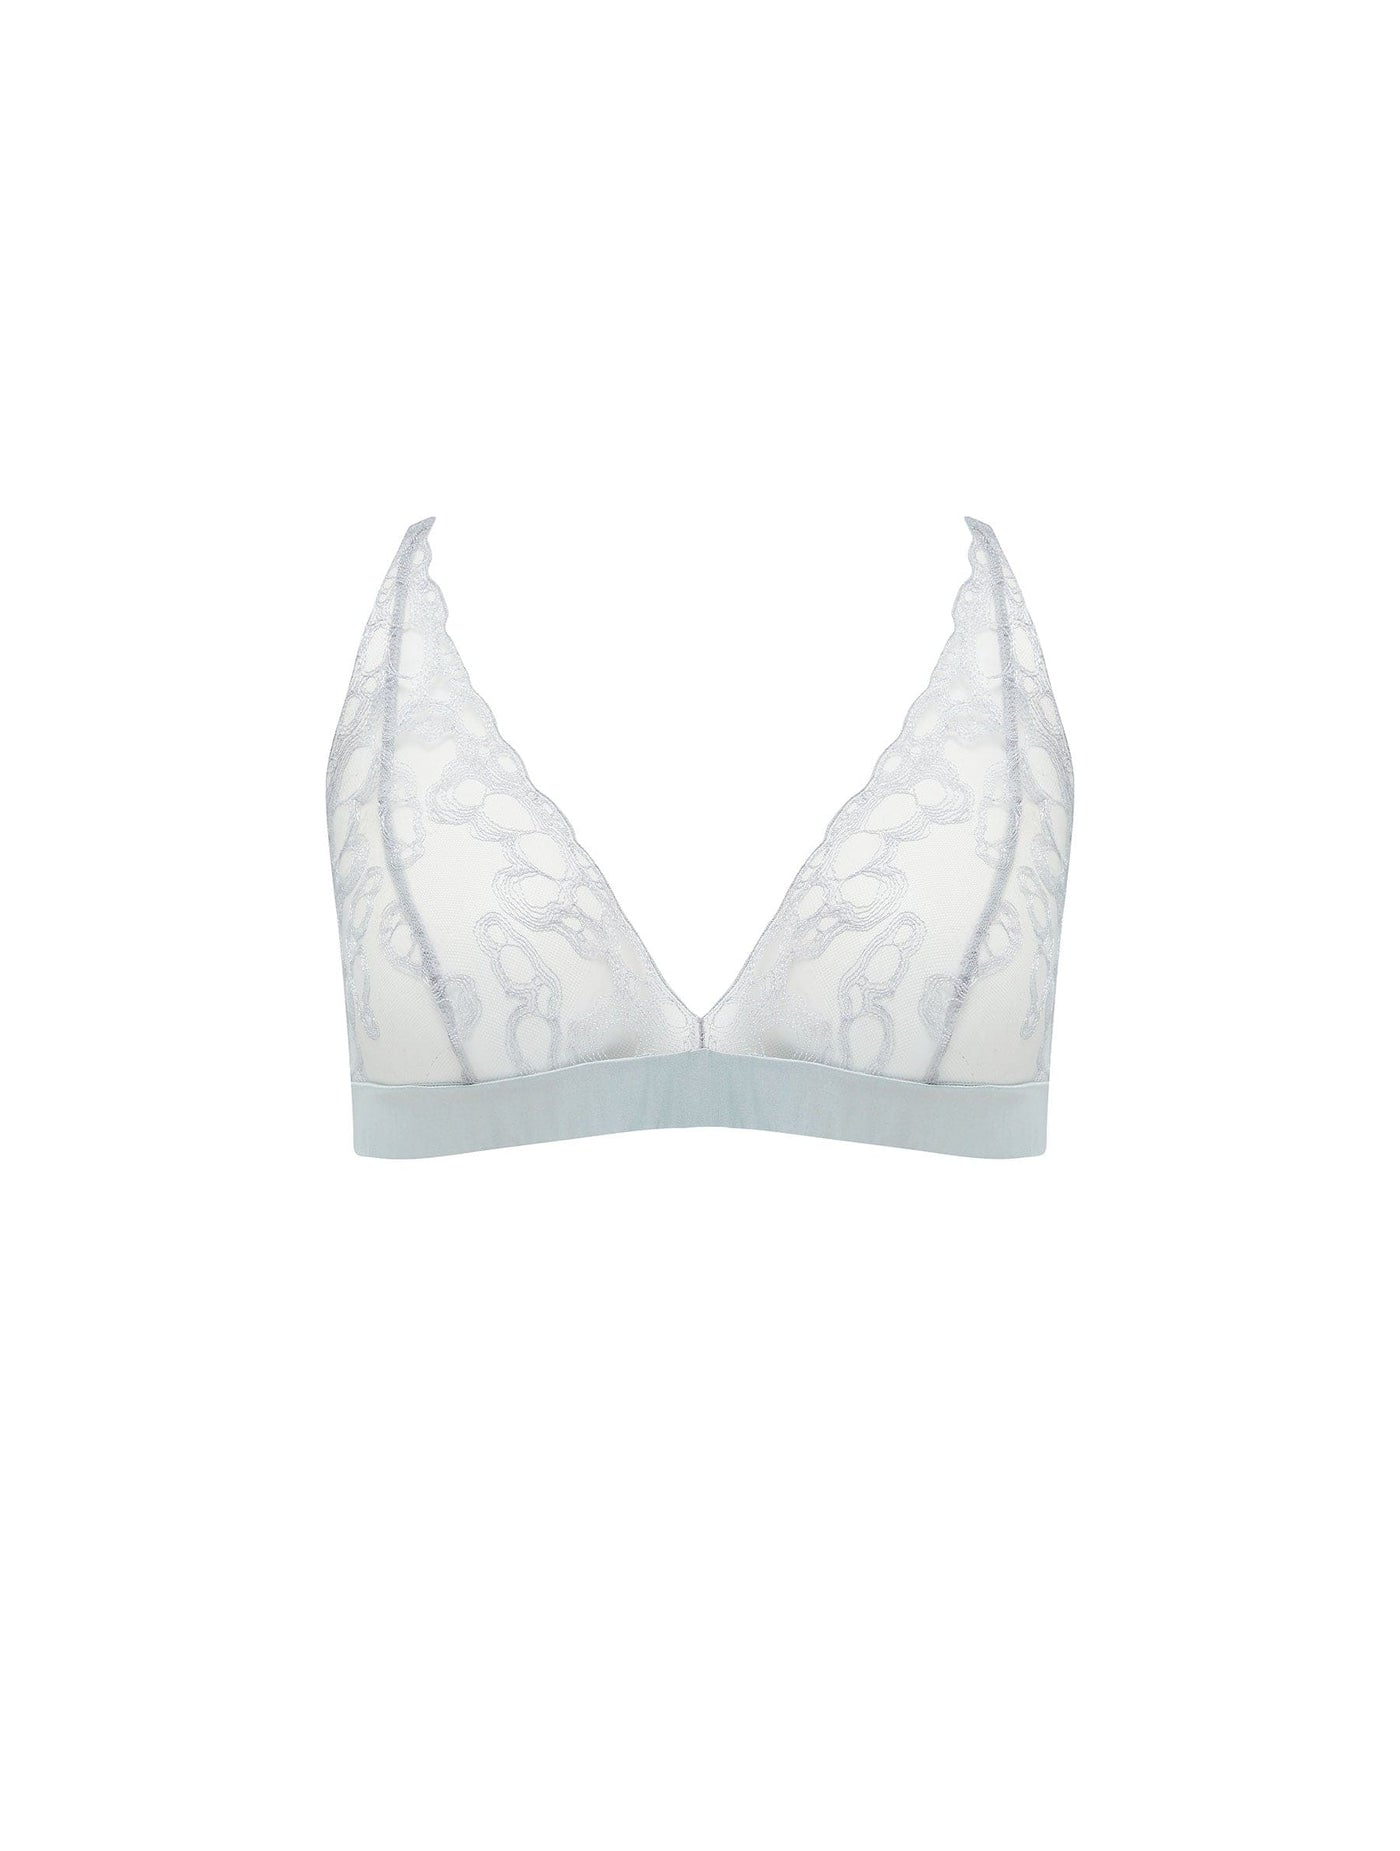 12 Delicate Sheer Tops To Style Over Bralettes